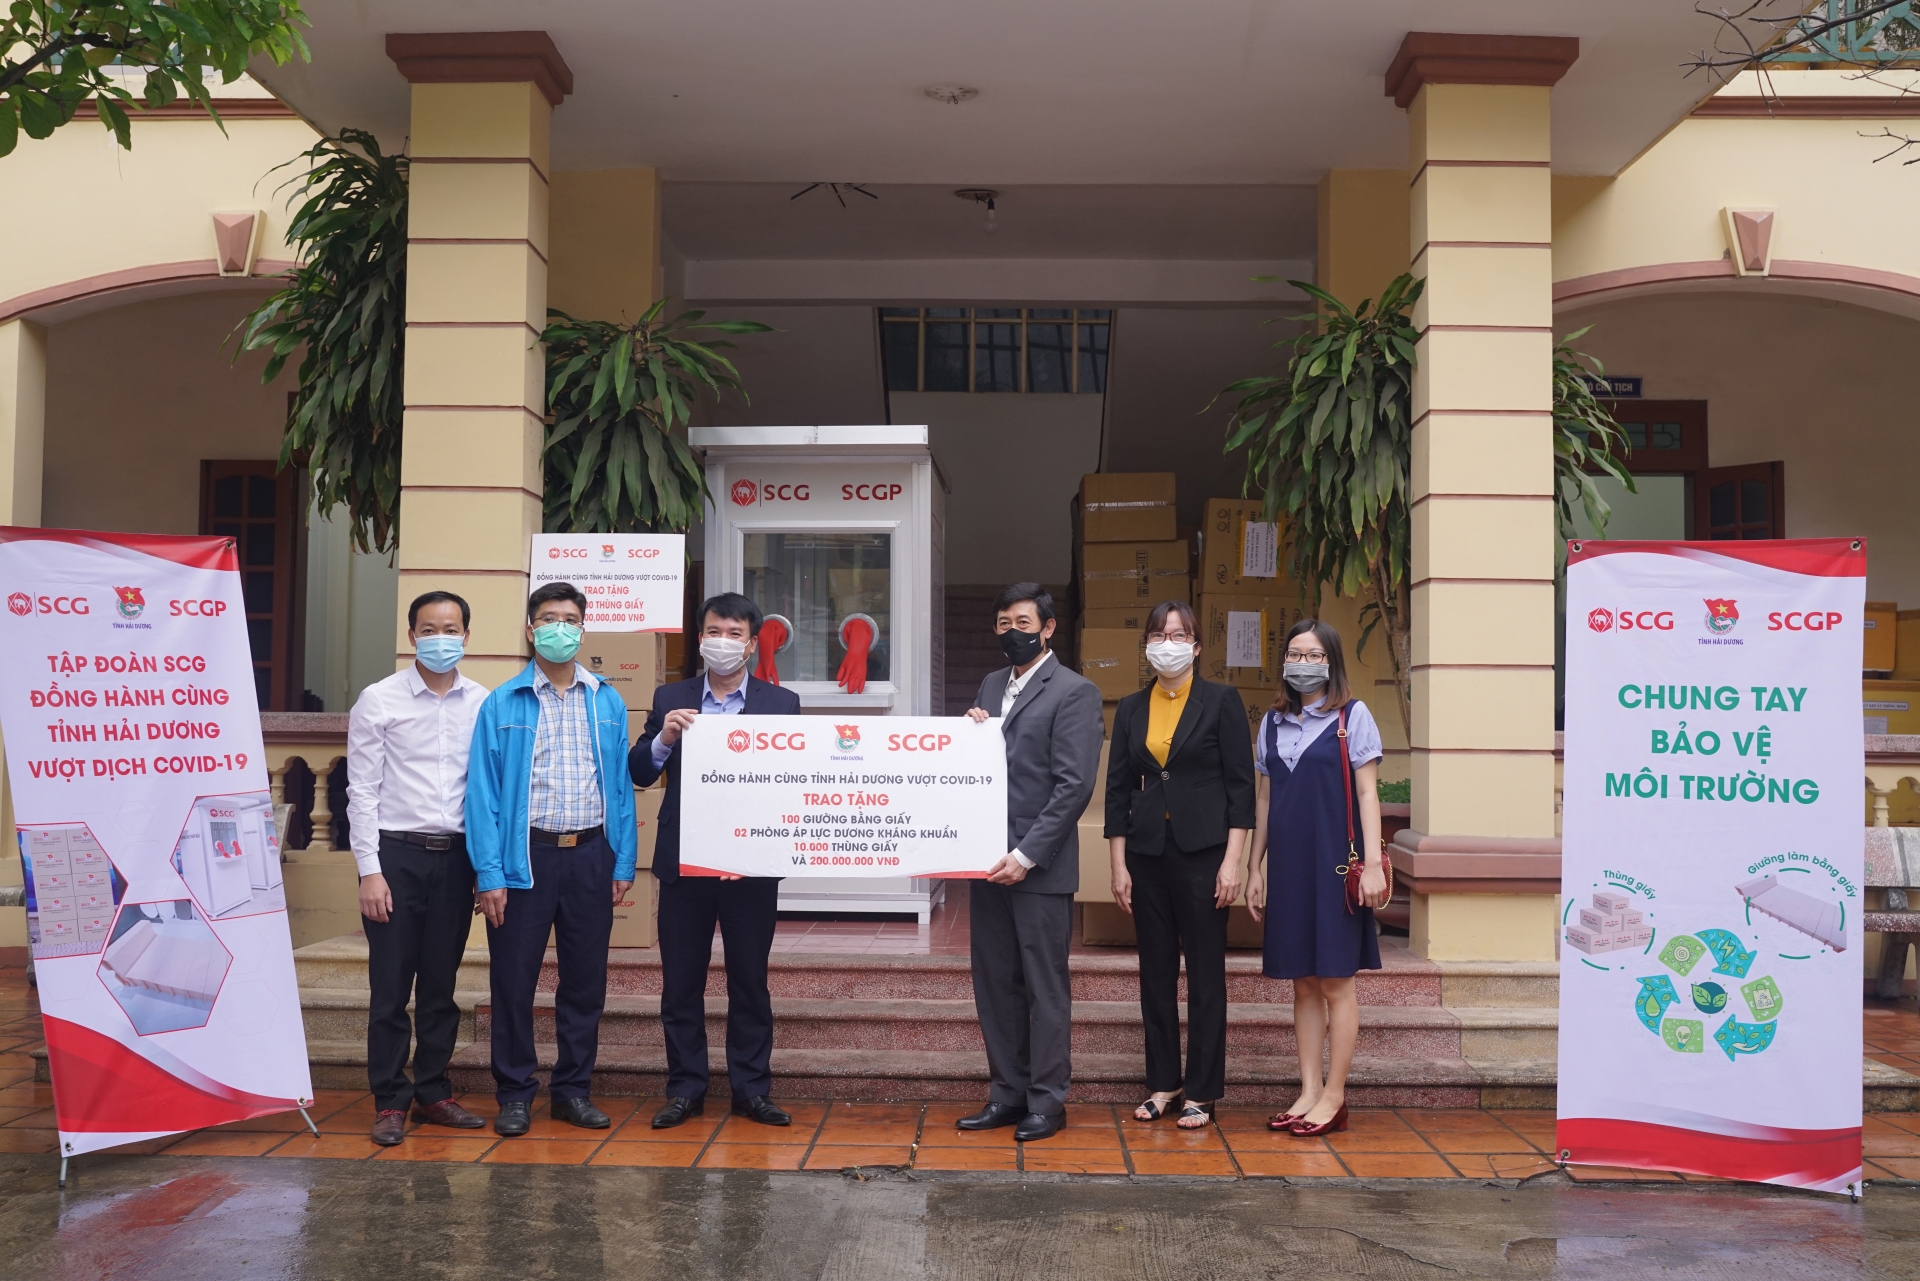 SCGP lends innovative solutions to fight COVID-19 in Vietnam